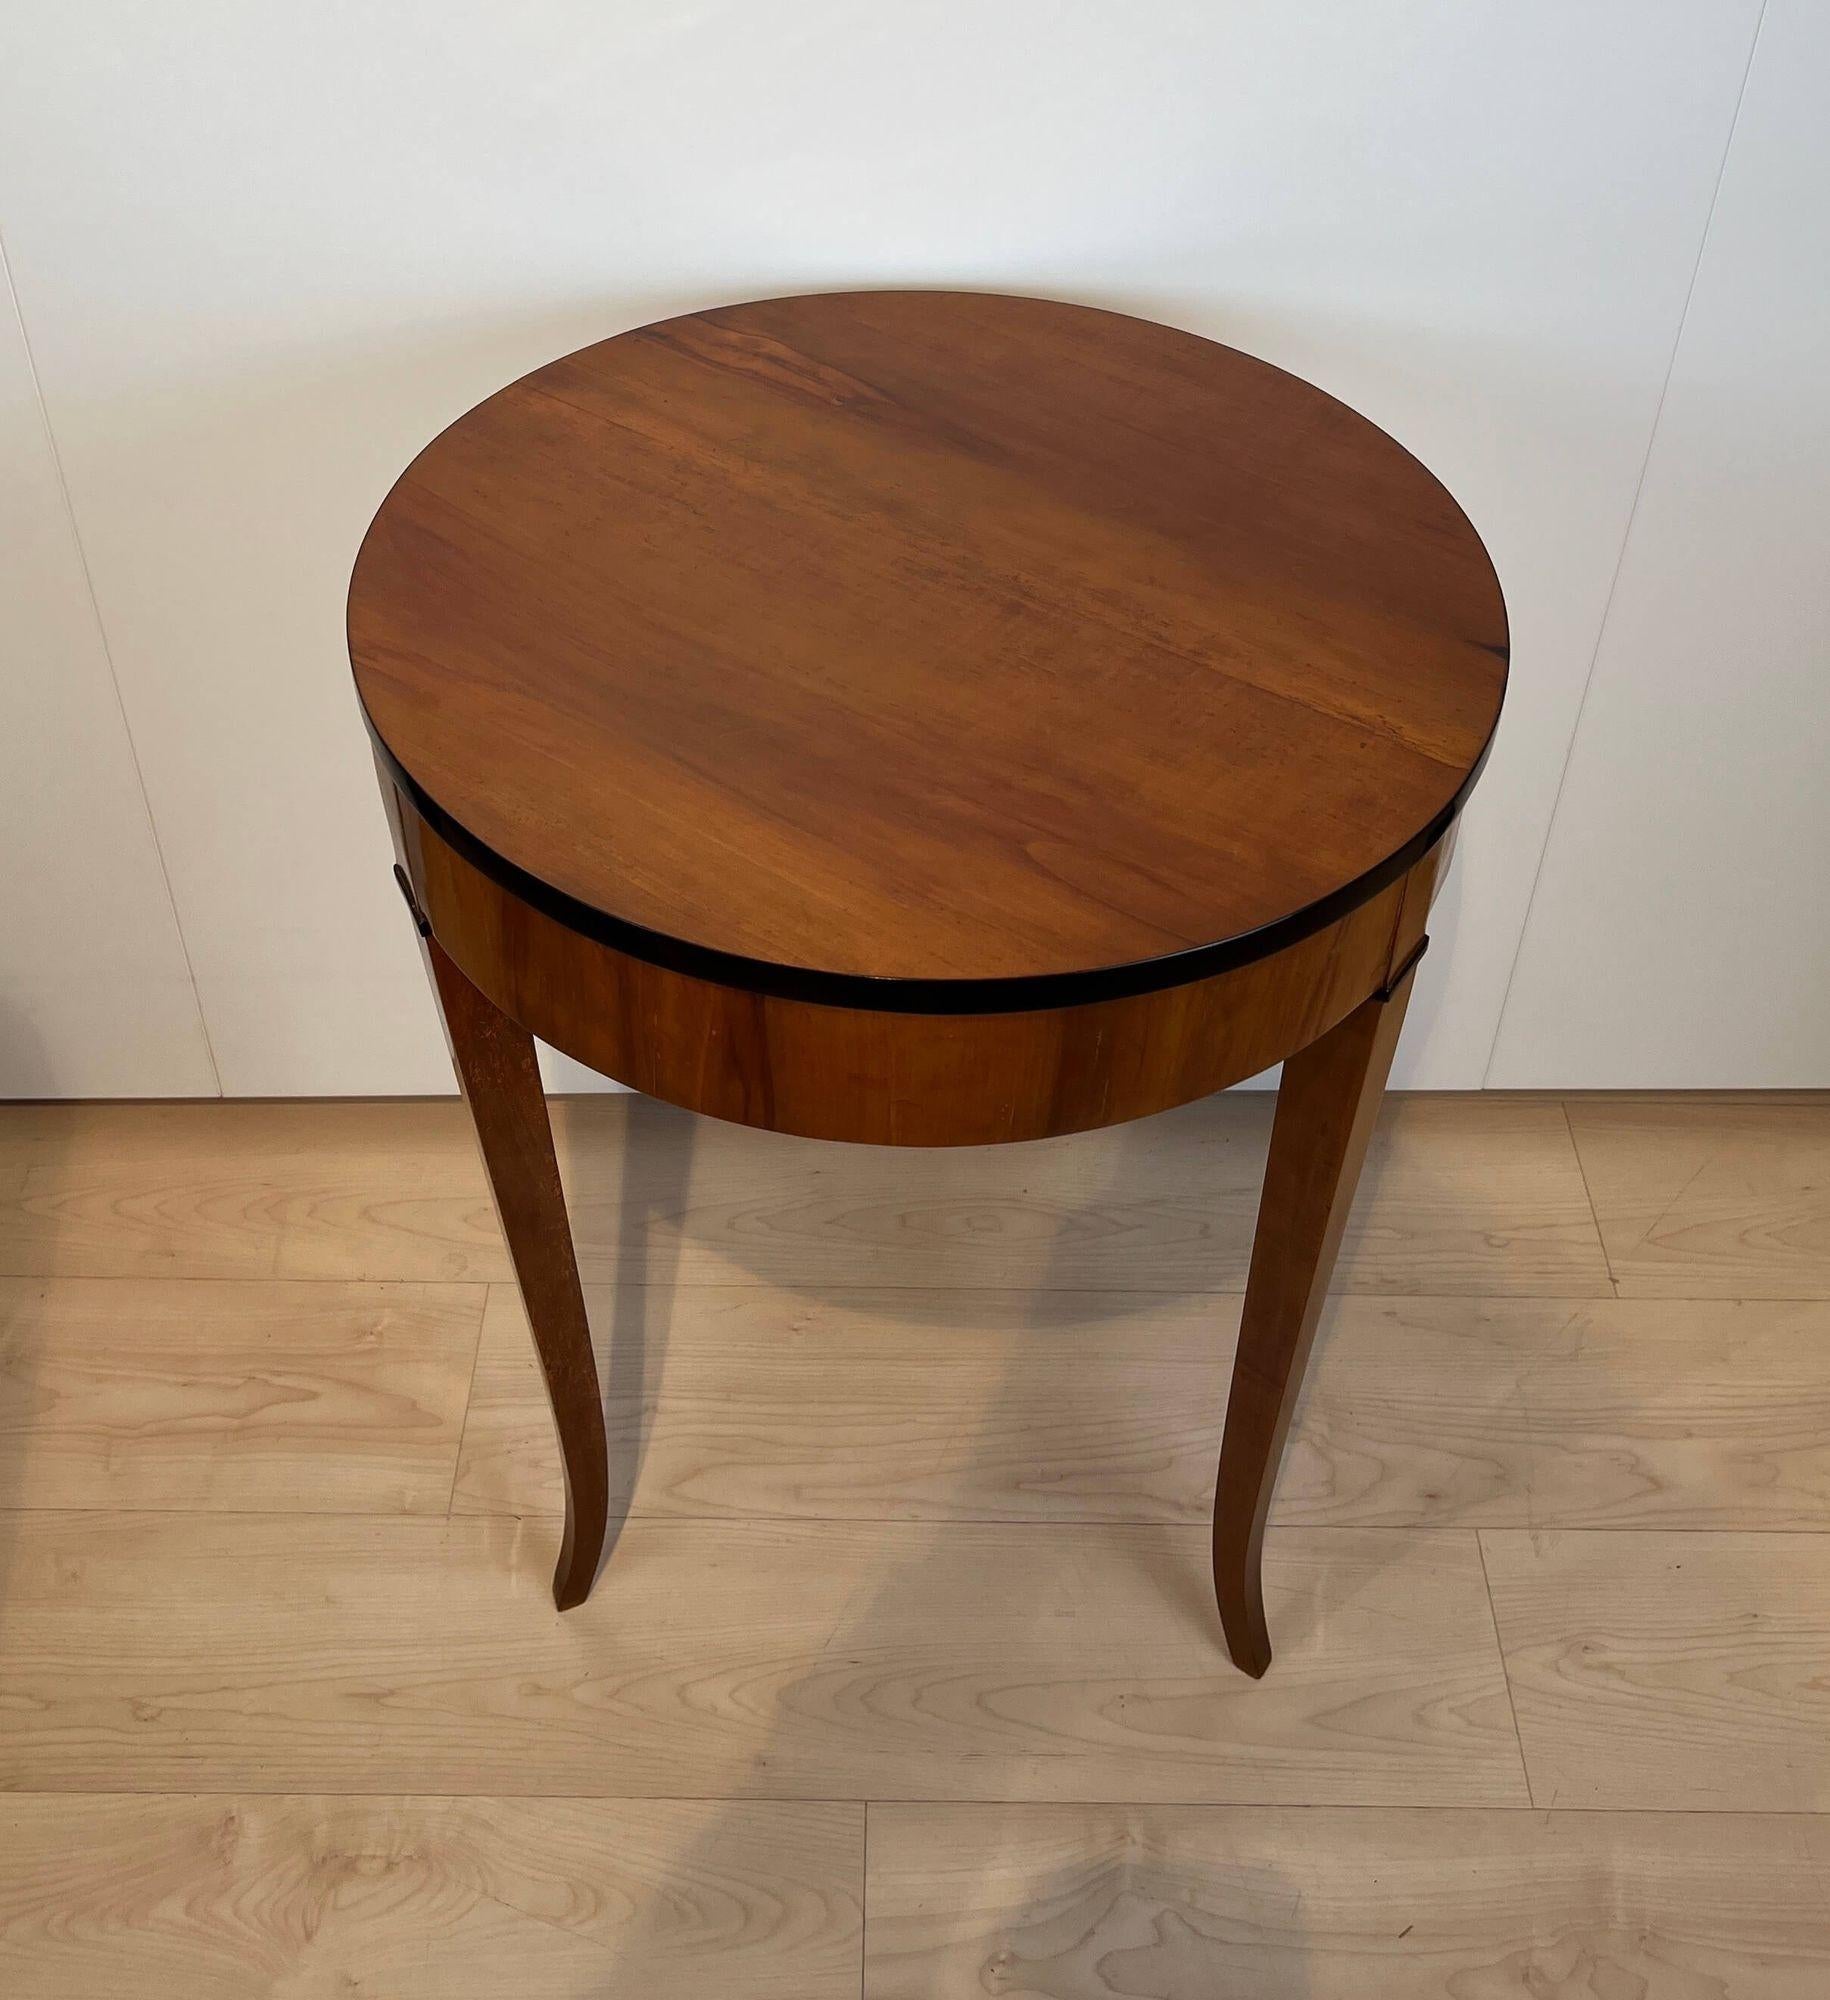 Round Biedermeier side table, cherrywood, South Germany, circa 1820.
 
Solid cherry wood at the top and legs and veneered at the frame.
Restored and hand polished with shellac. Partly ebonized.
 
Dimensions: H 76,5 cm , Ø 56 cm.